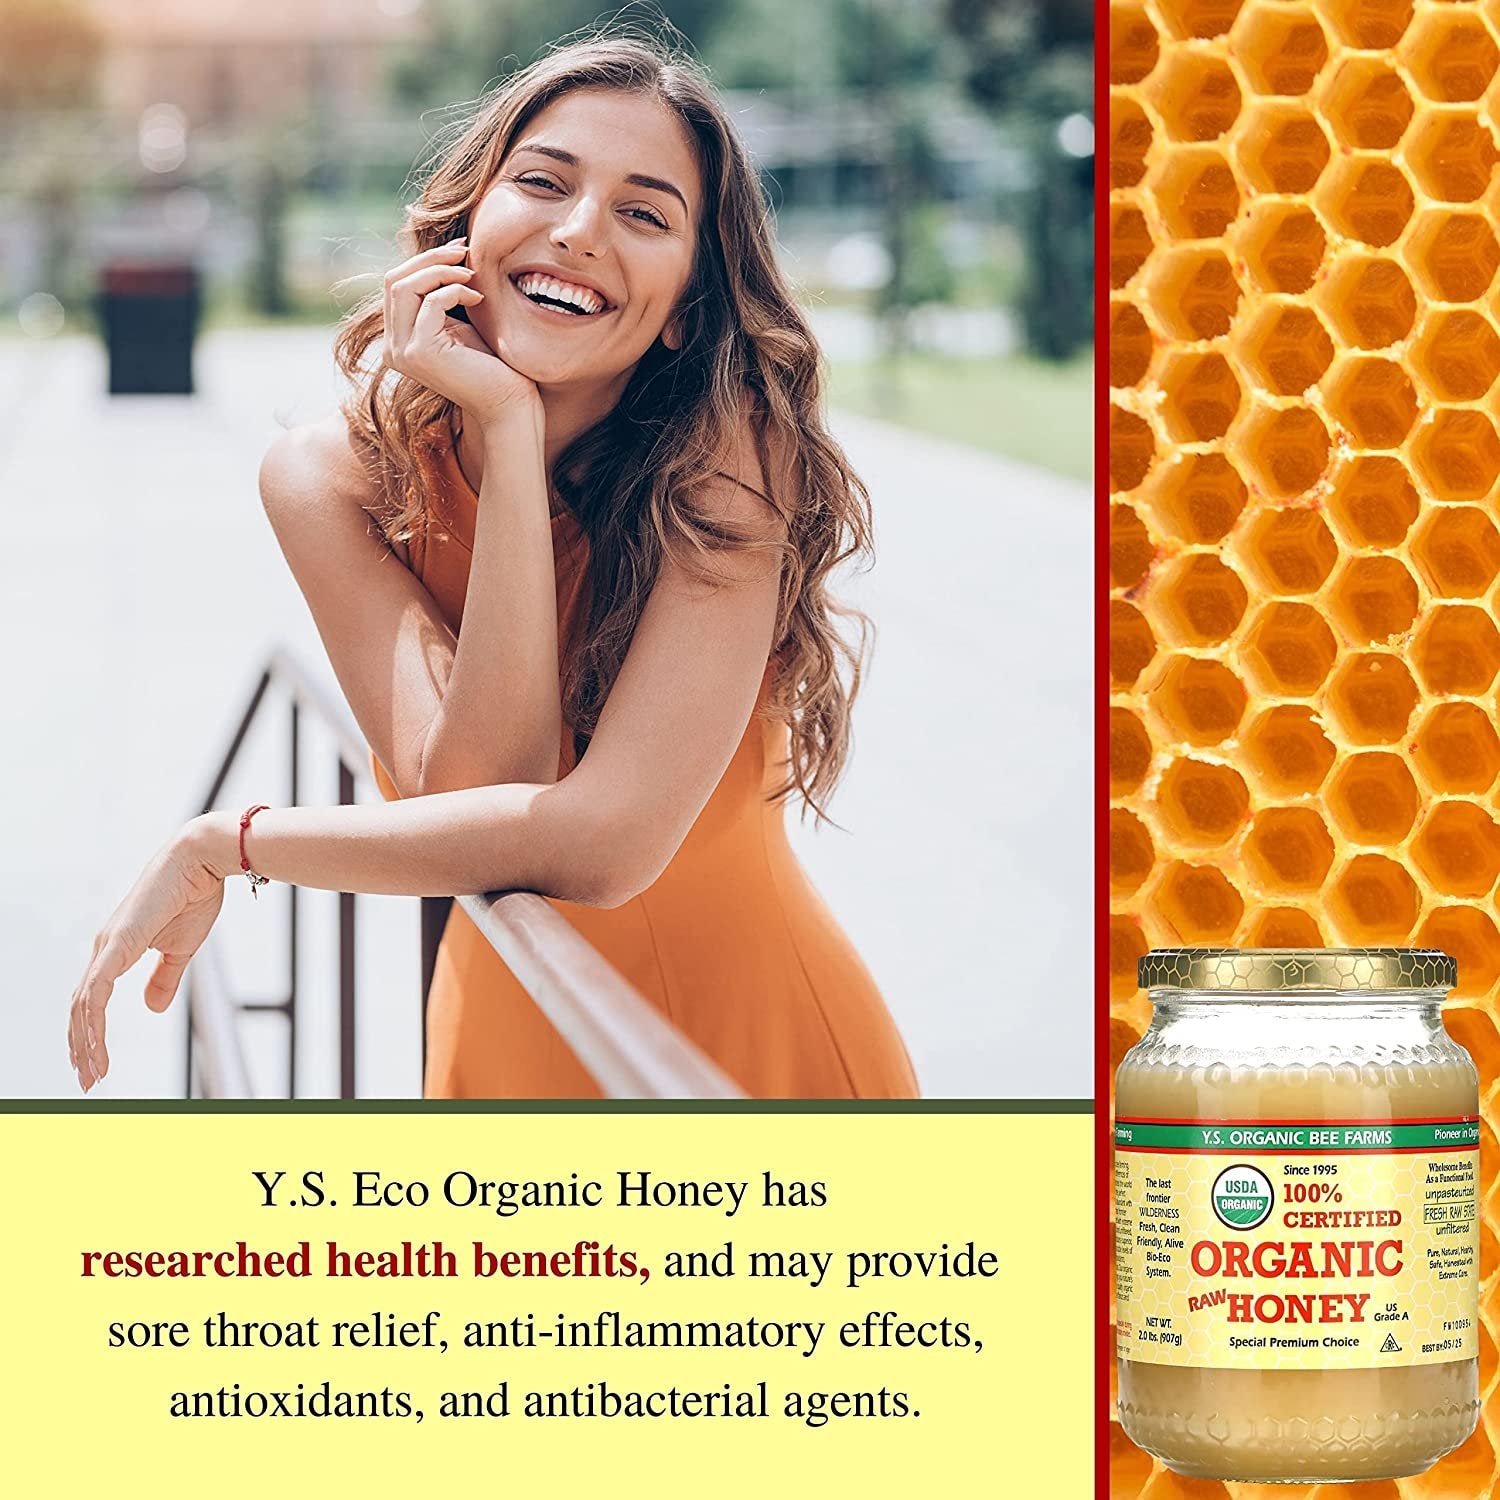 Y.S. Organic Bee Farms, 100% Certified Y.S. Organic Raw Honey, Unpasteurized, Unfiltered, Fresh Raw State, Kosher, Pure, Natural, Healthy, Safe, Gluten Free, Harvested with Extreme Care, 2 Lb (4)